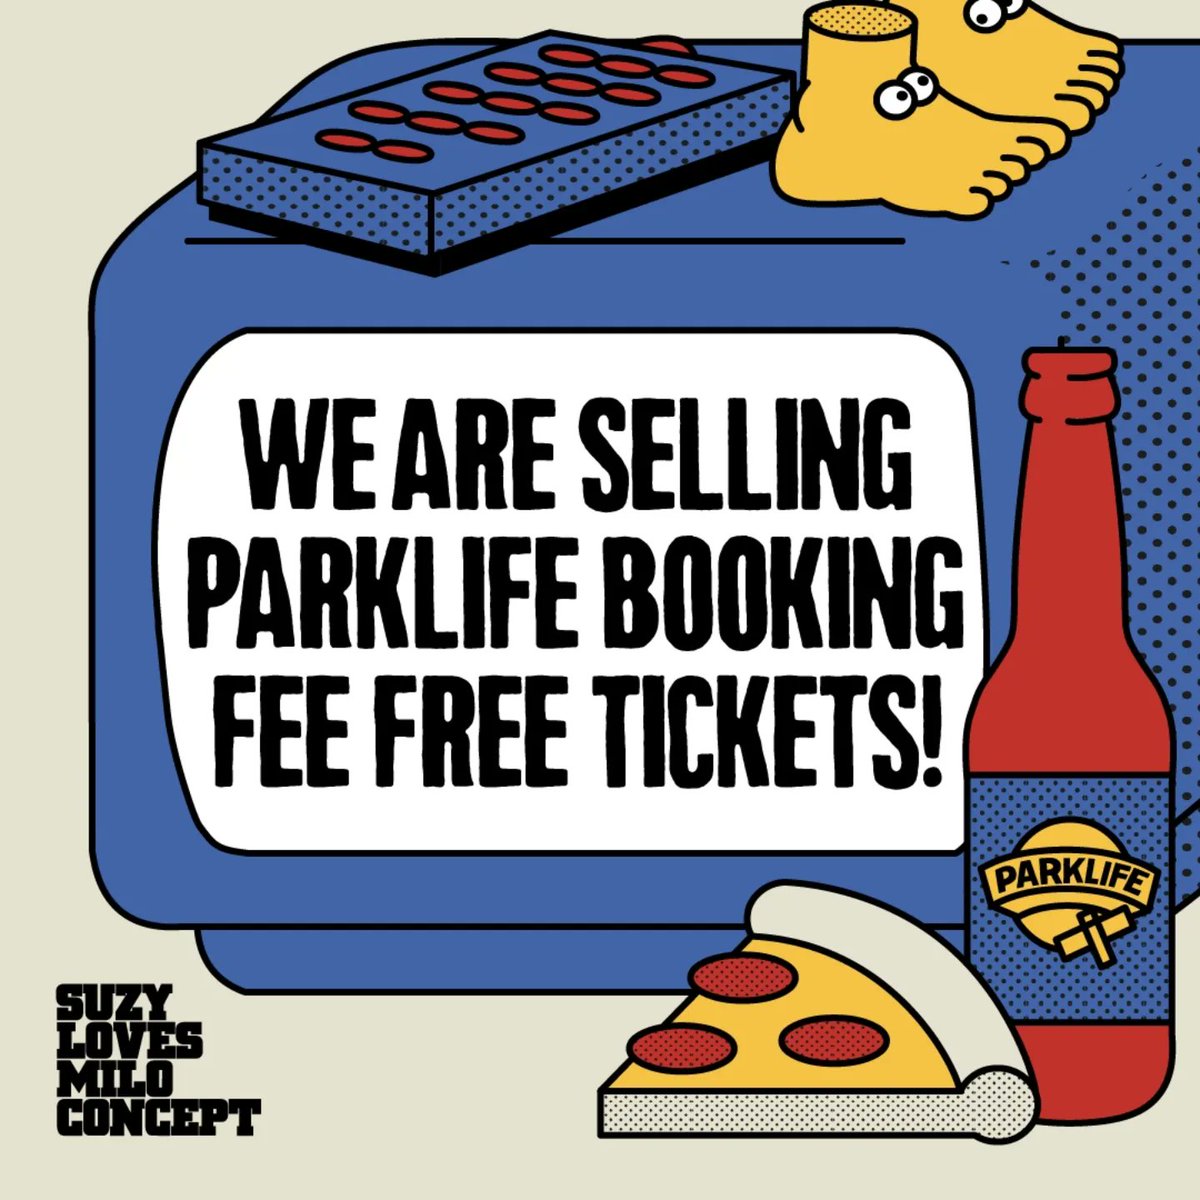 FEE FREE PARKLIFE TICKETS, AVAILABLE HERE! There's a couple of new posters in the window and on the counter today. @Parklifefest takes place at Heaton Park, Manchester in June, and you can now buy tickets from the shop without any fees! Just pop in and ask for details.